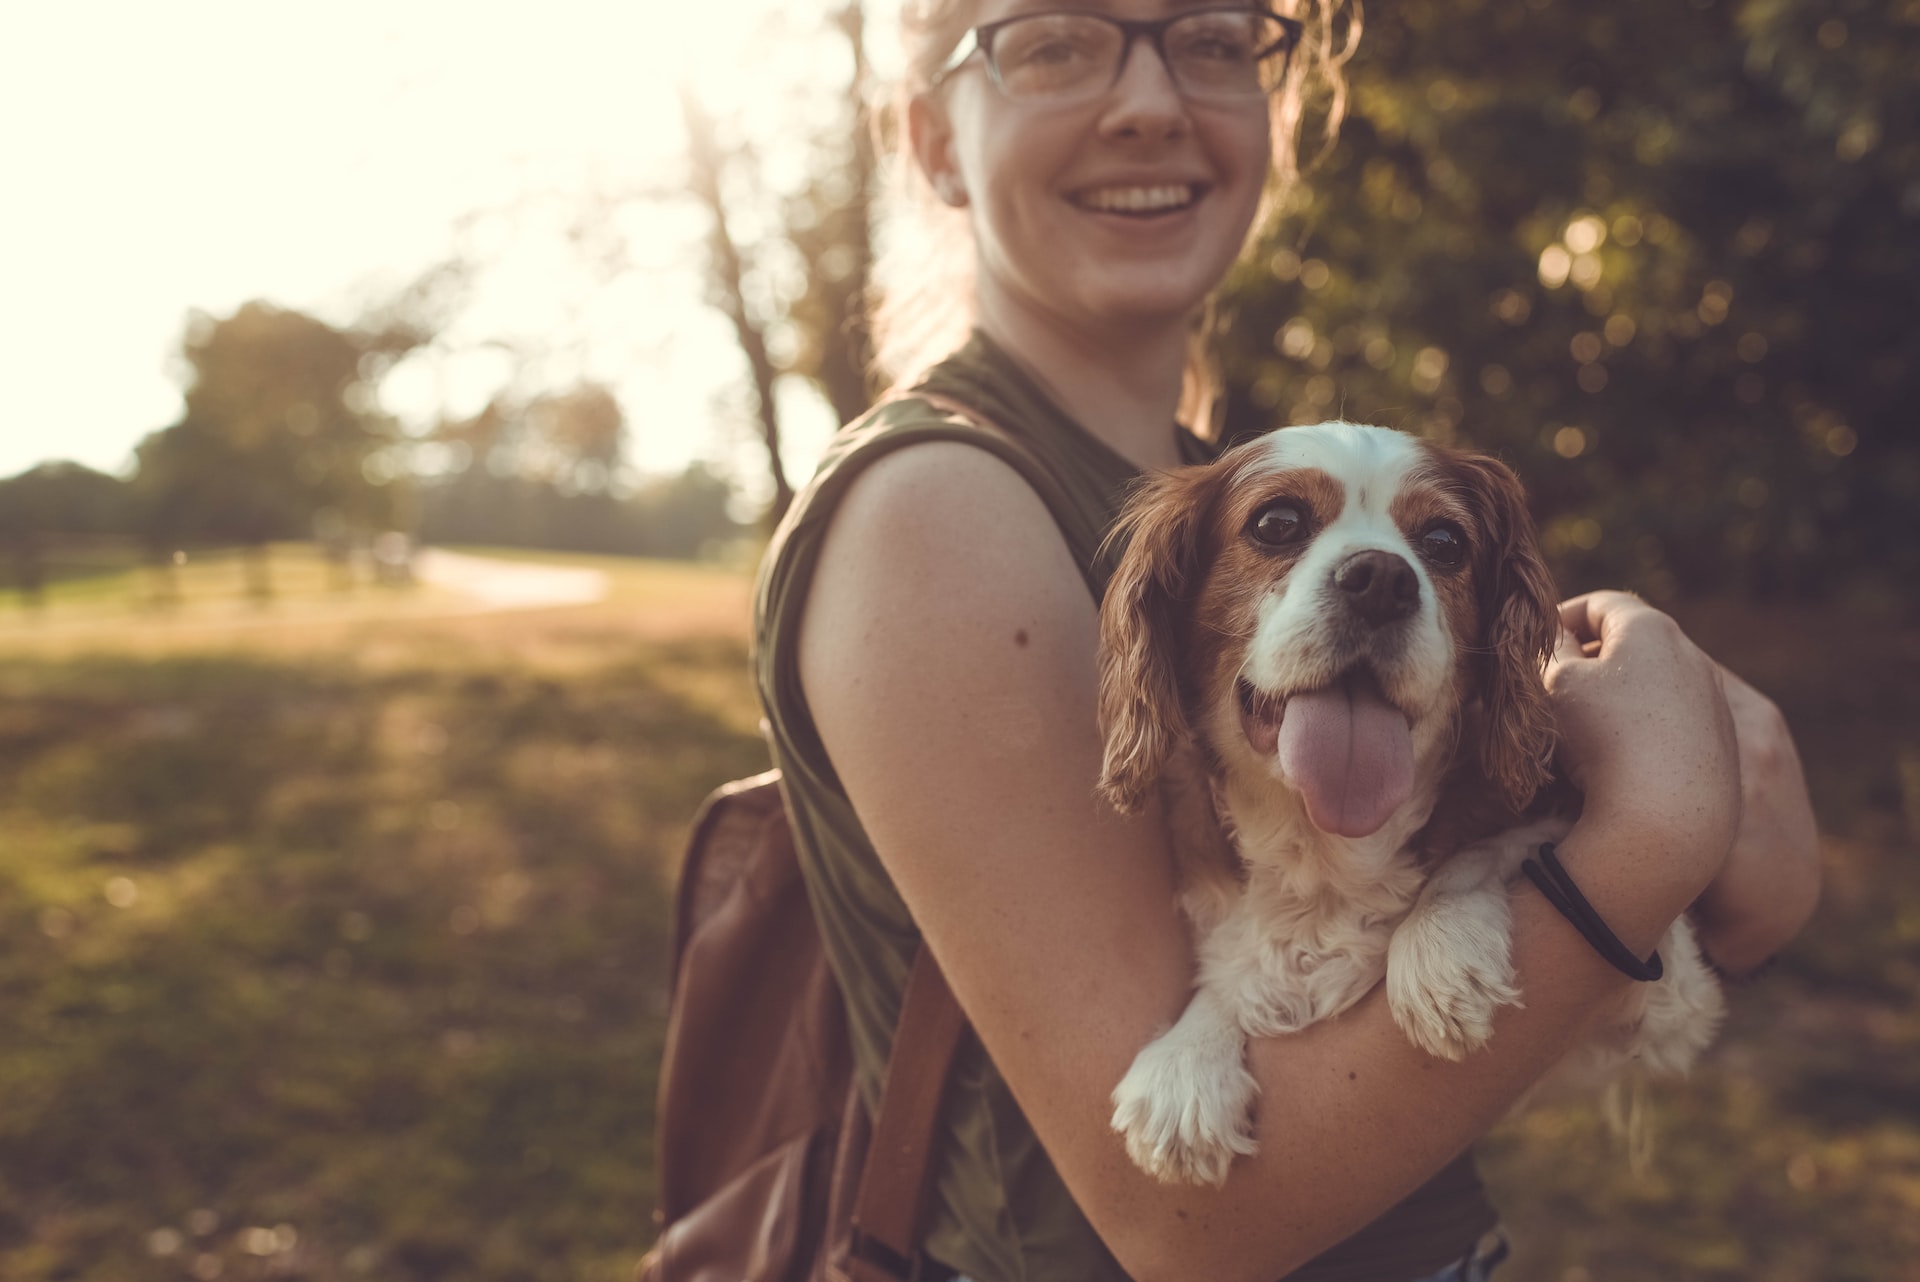 Woman smiling while holding her dog